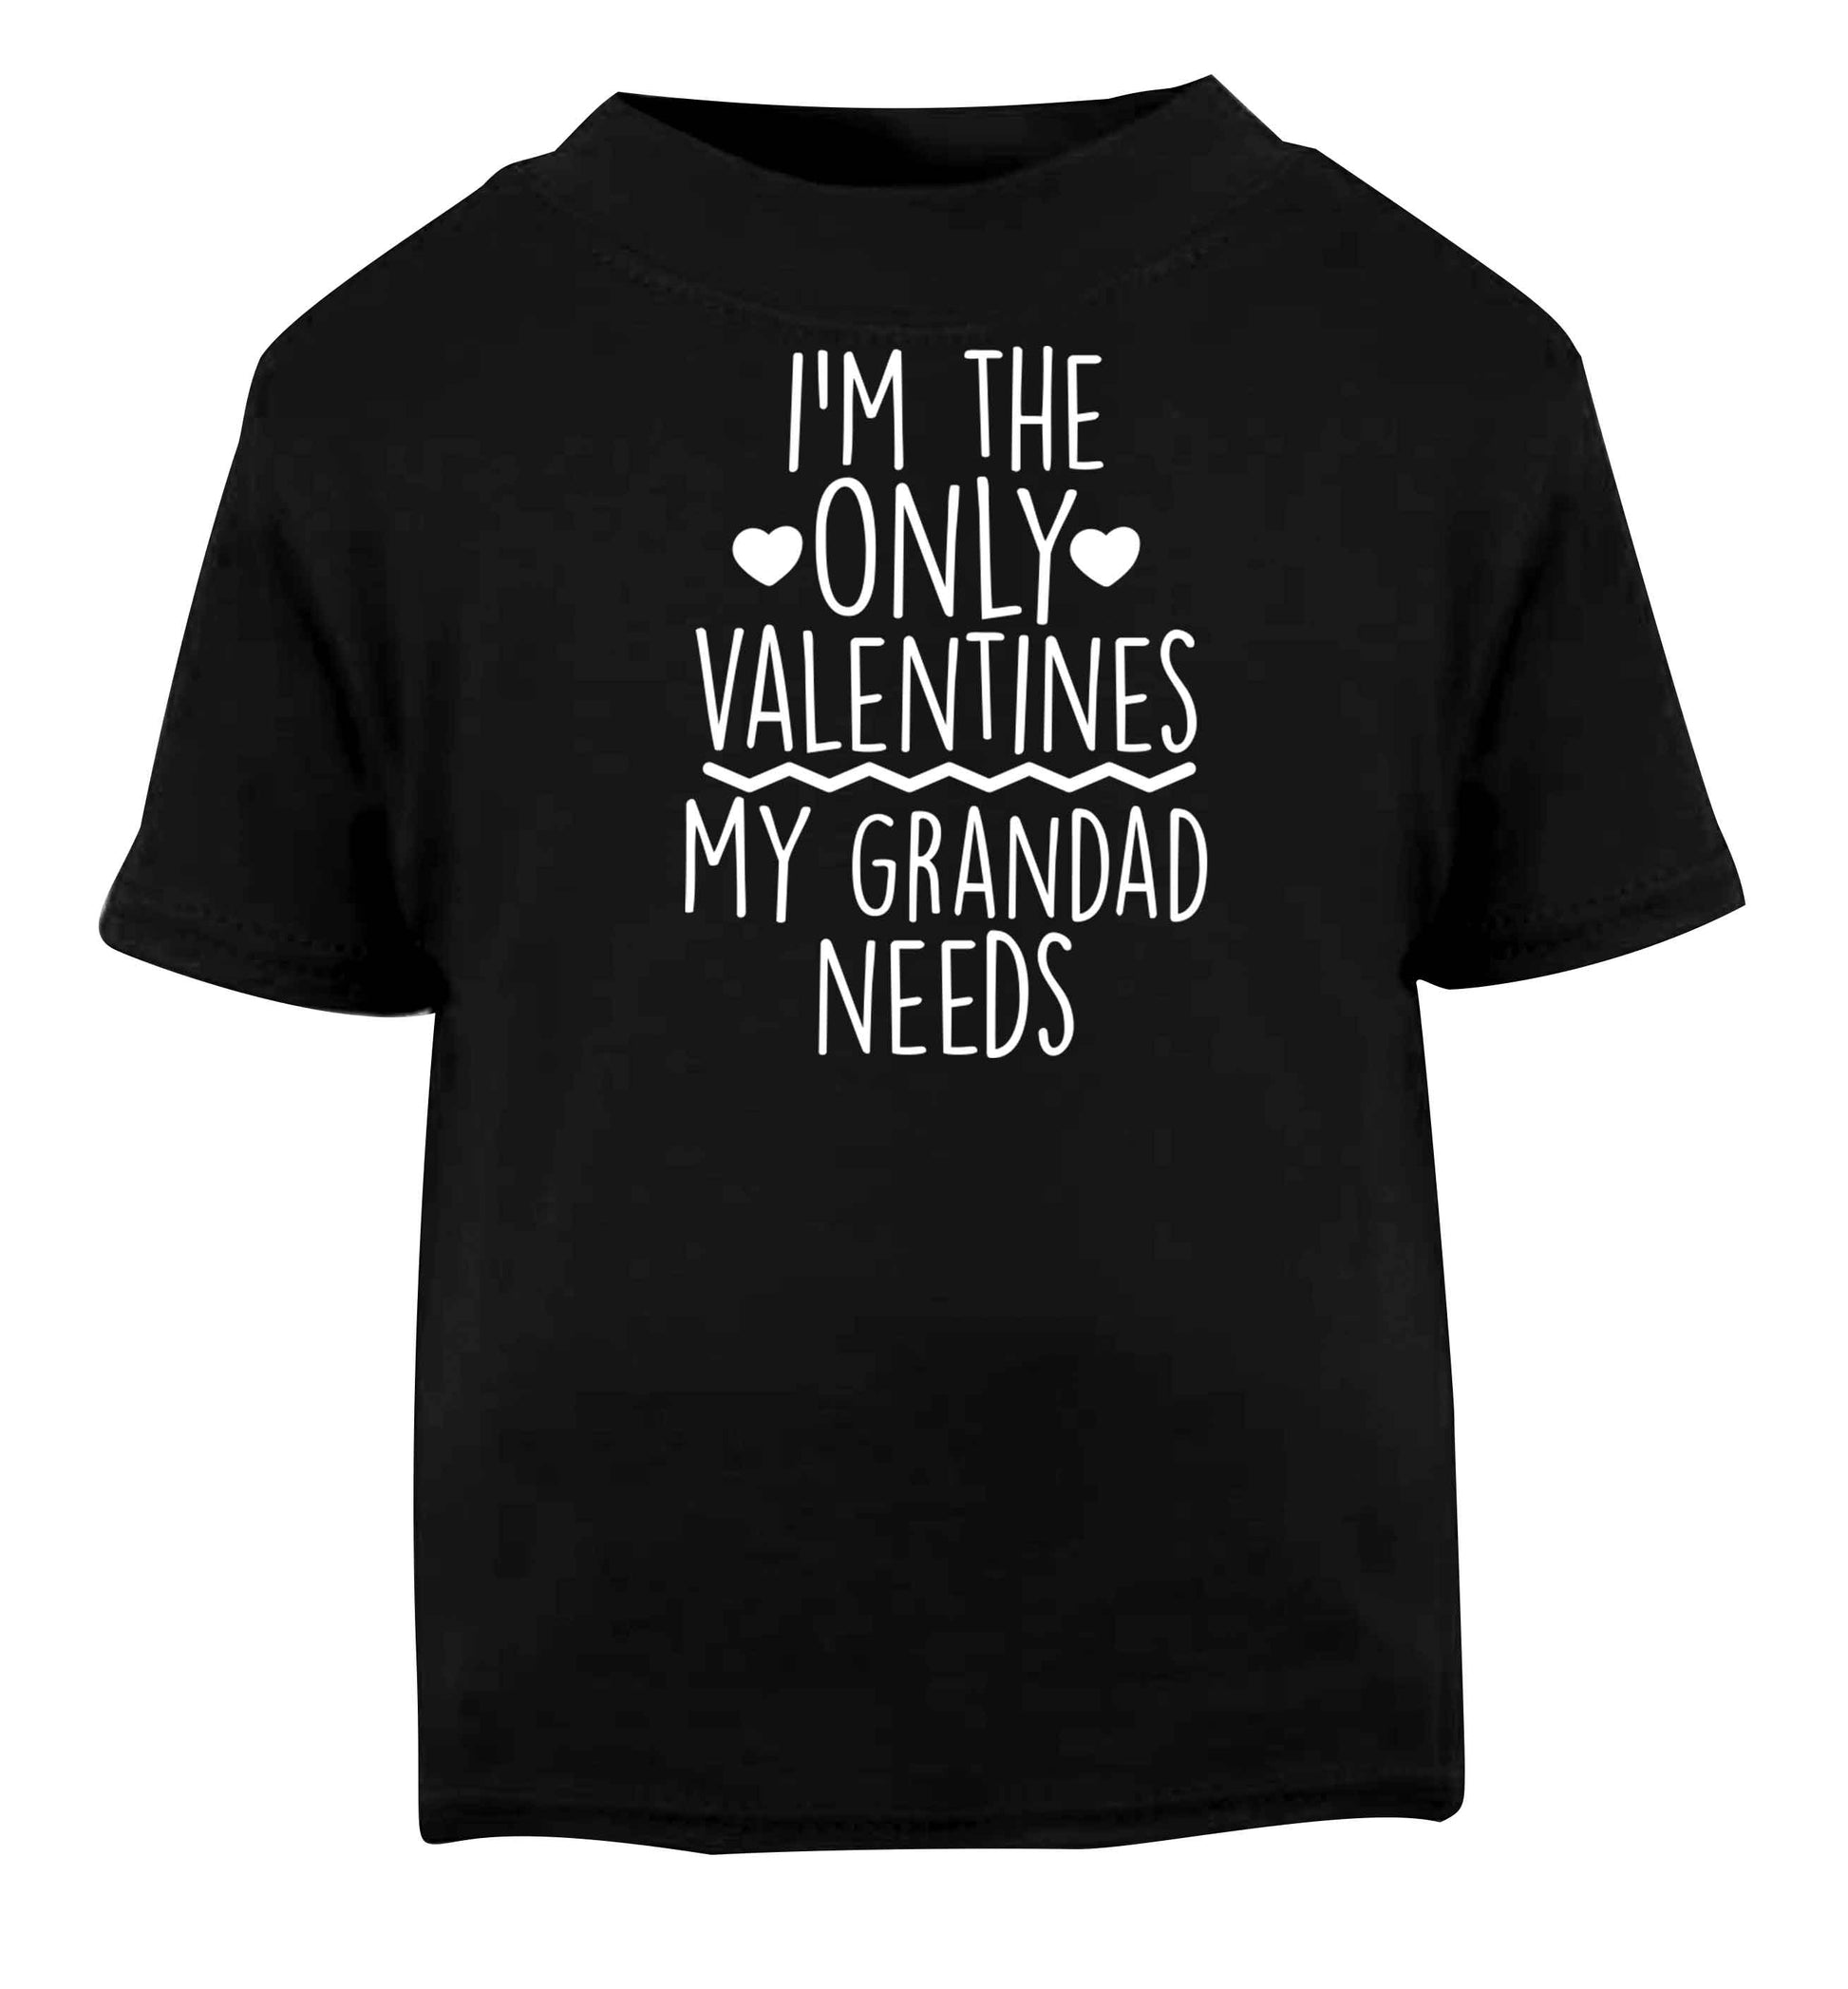 I'm the only valentines my grandad needs Black baby toddler Tshirt 2 years